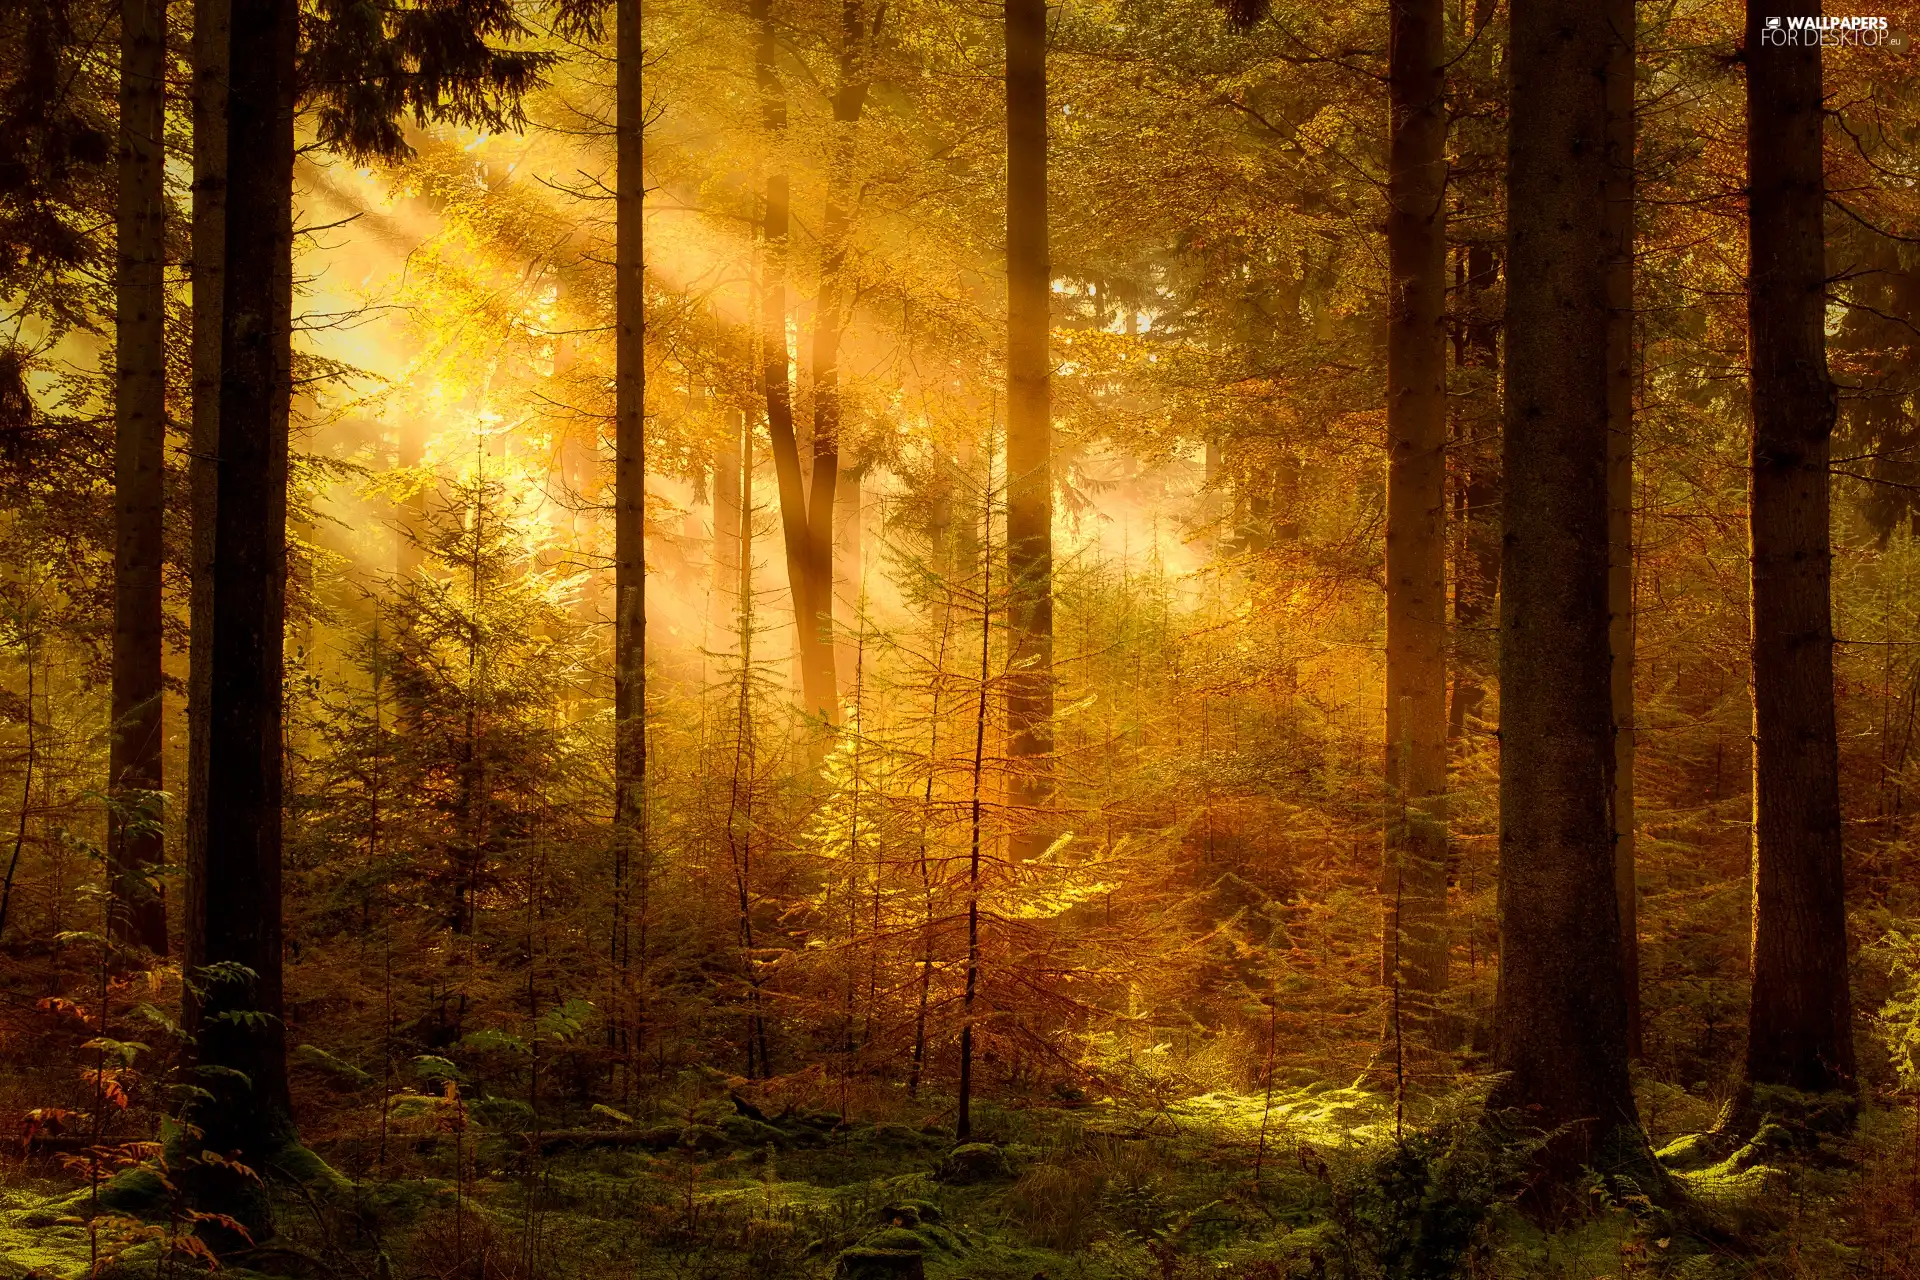 viewes, Plants, light breaking through sky, trees, forest